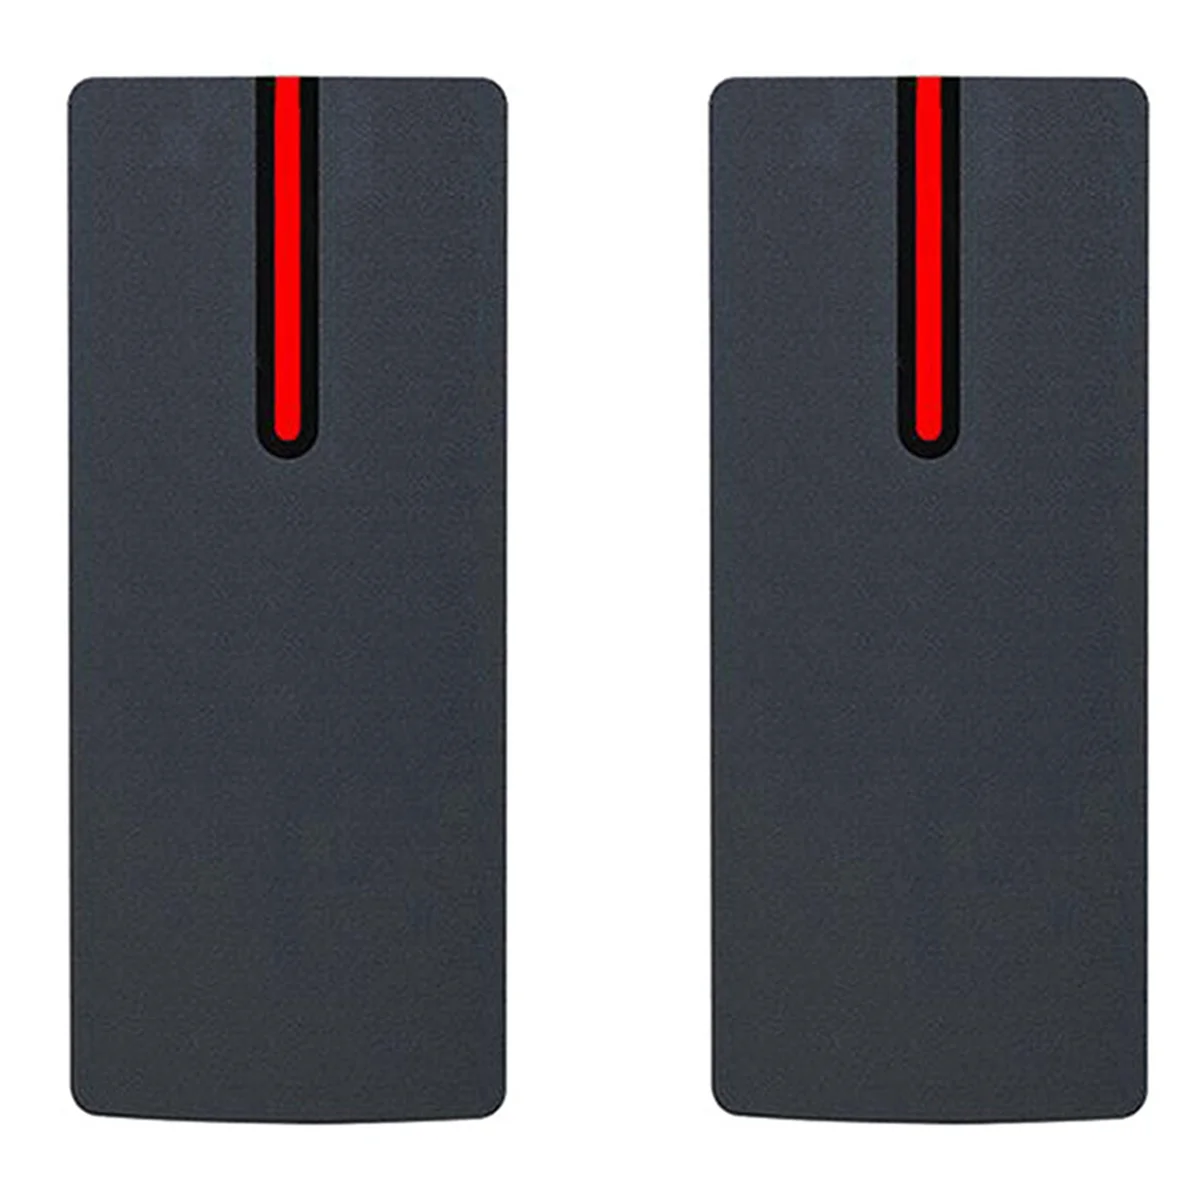 

2X IP68 Waterproof IC Card Reader 13.56Khz Proximity Card Access Control Slave Reader Support Wiegand 26/34 Output